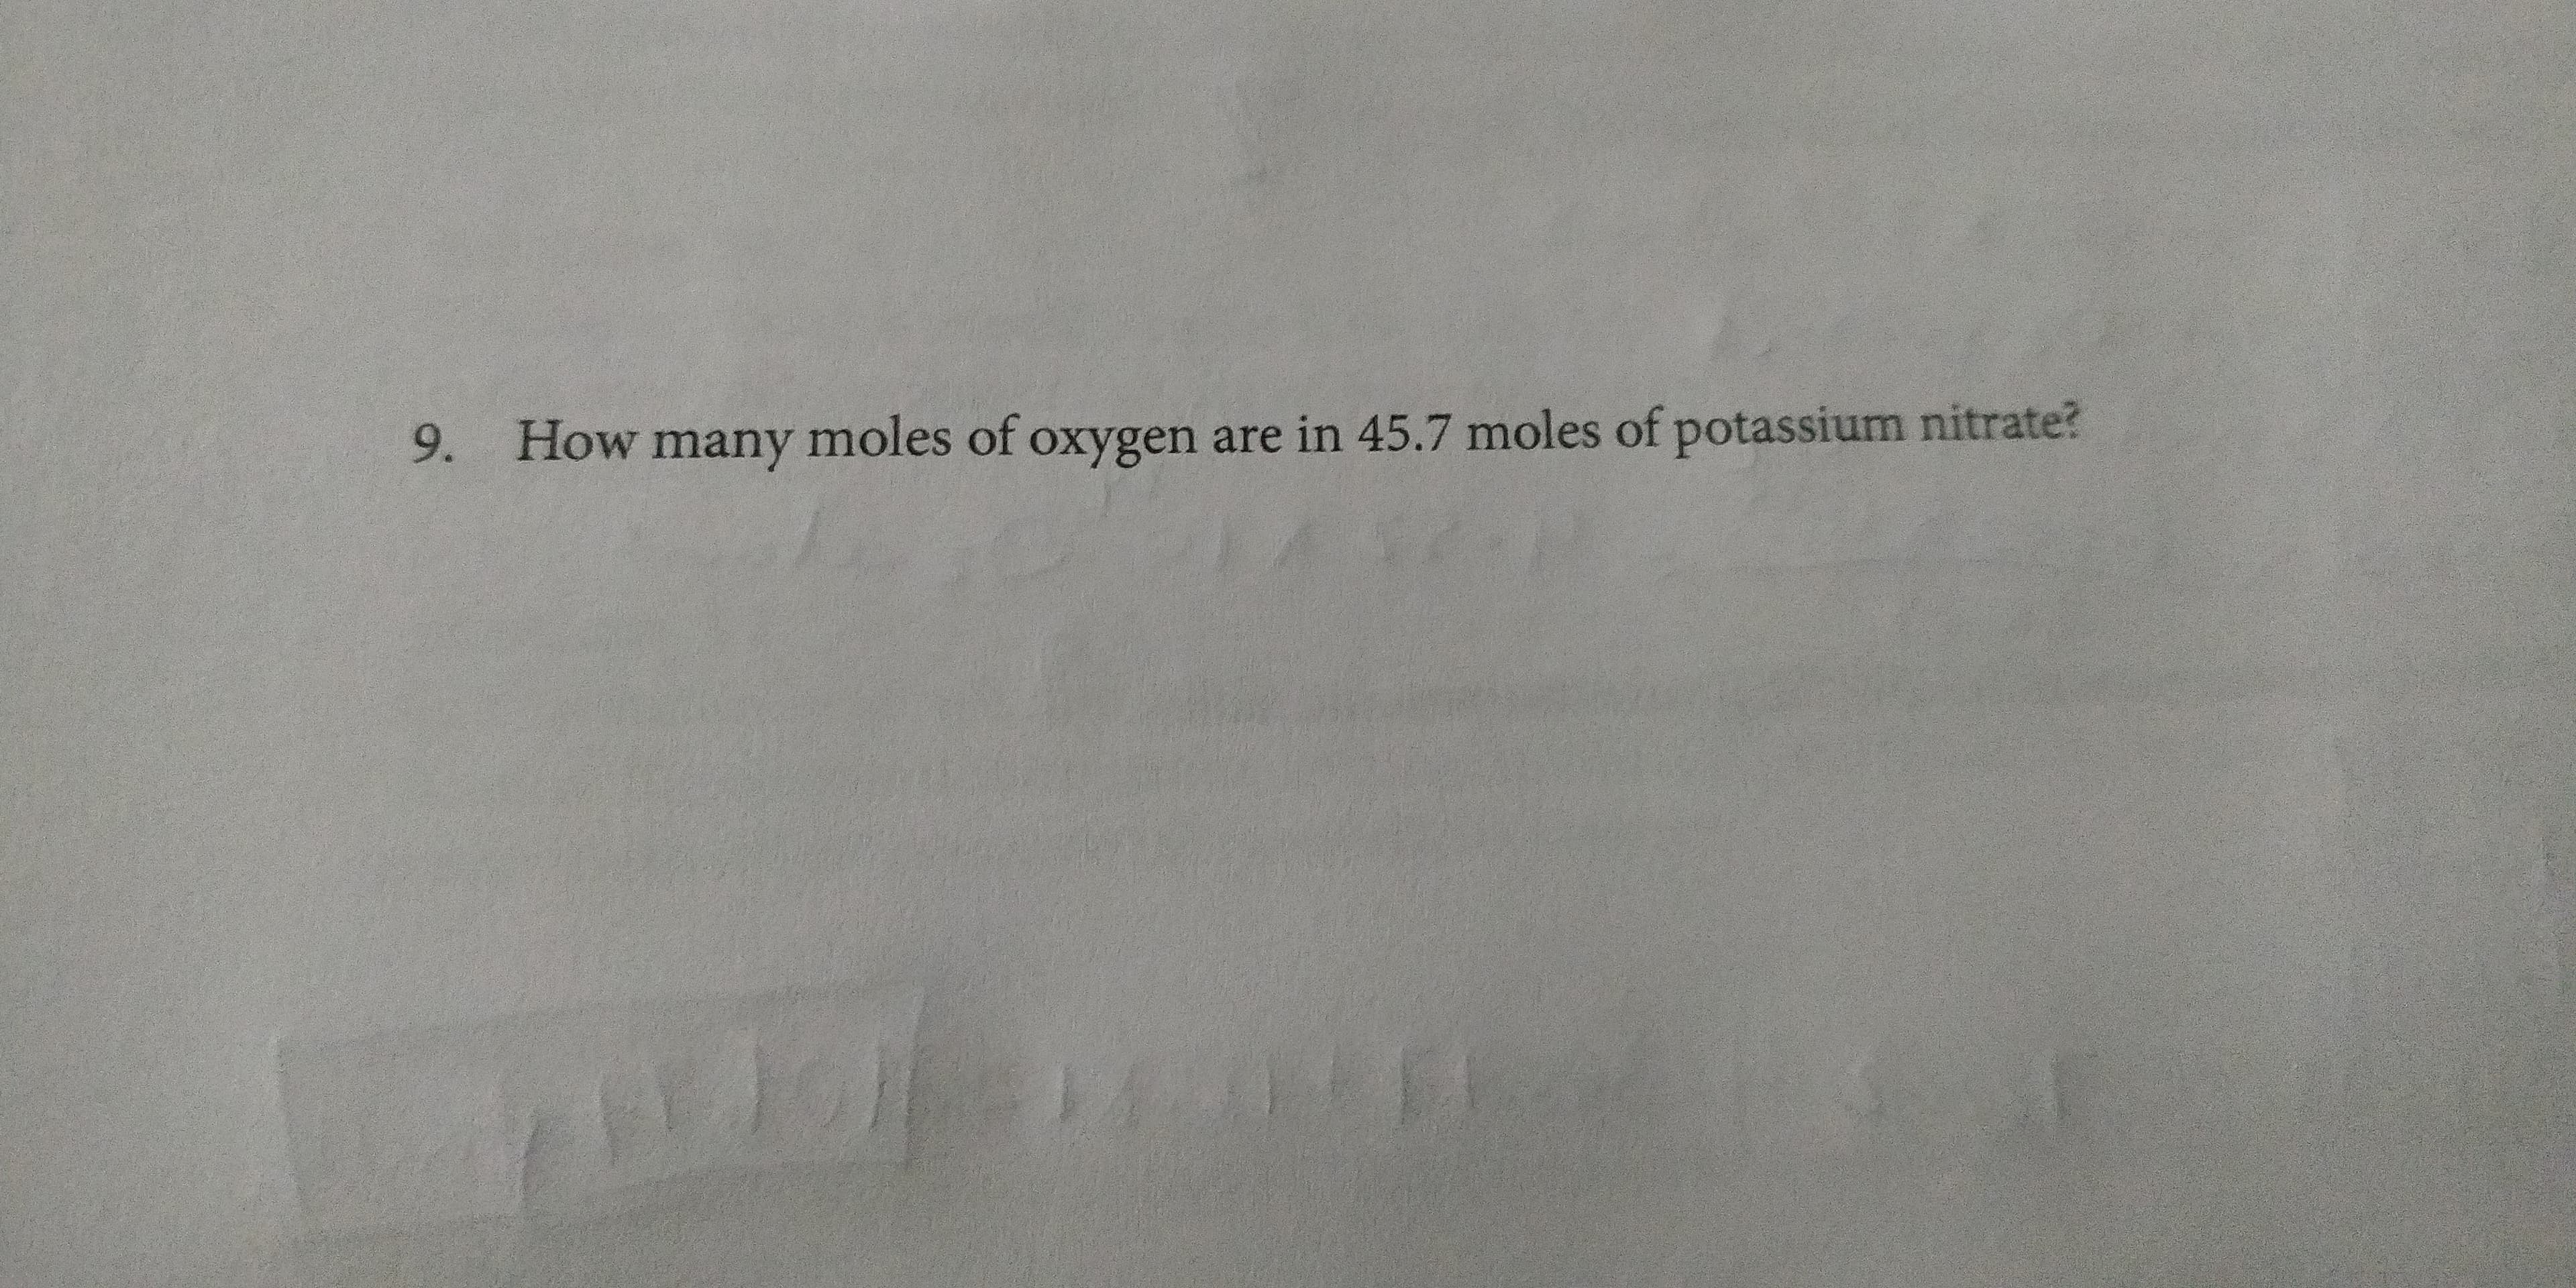 How many moles of oxygen are in 45.7 moles of potassium nitrate?
9.
